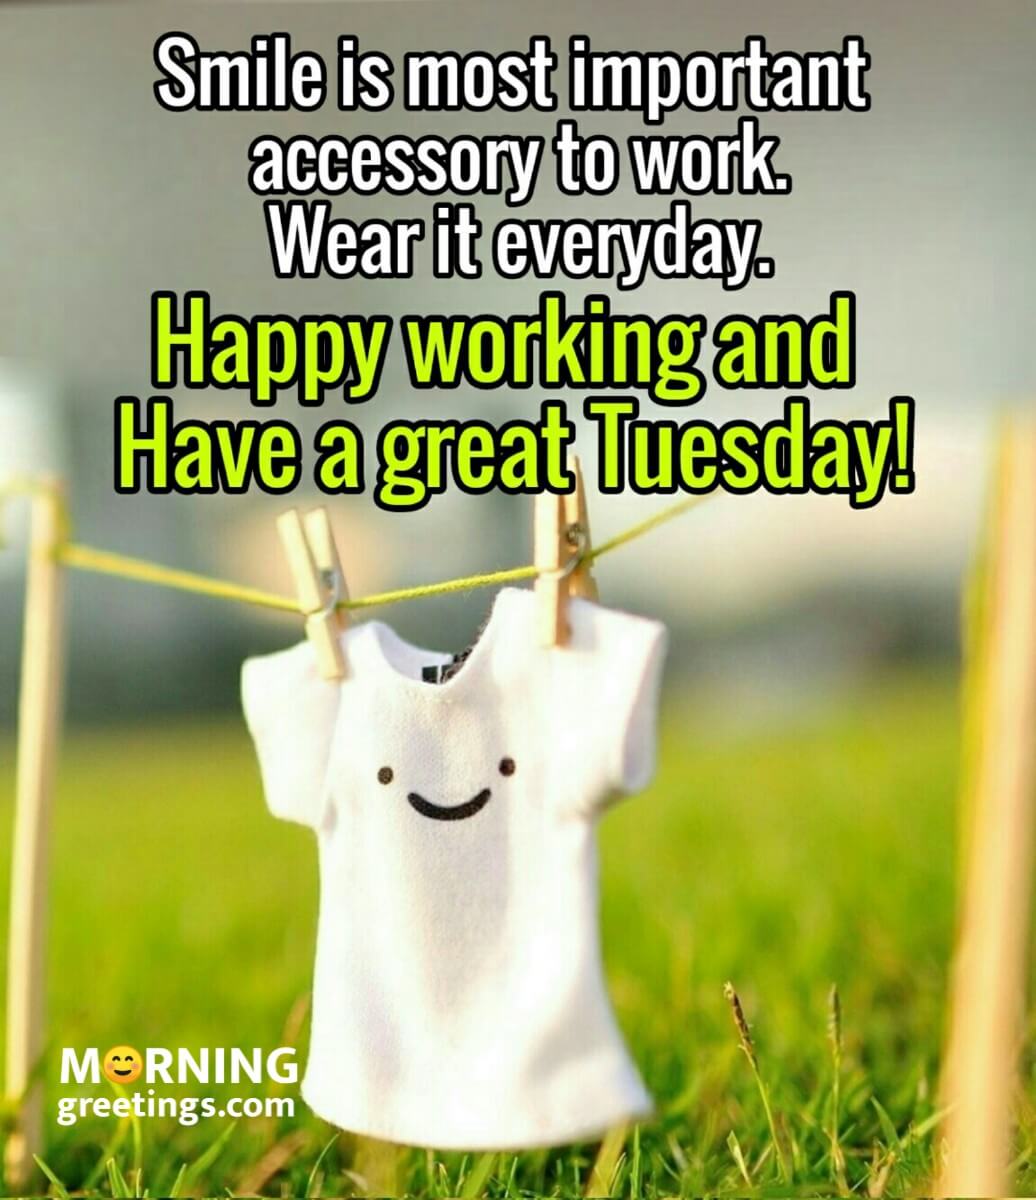 50 Best Tuesday Morning Quotes Wishes Pics - Morning Greetings